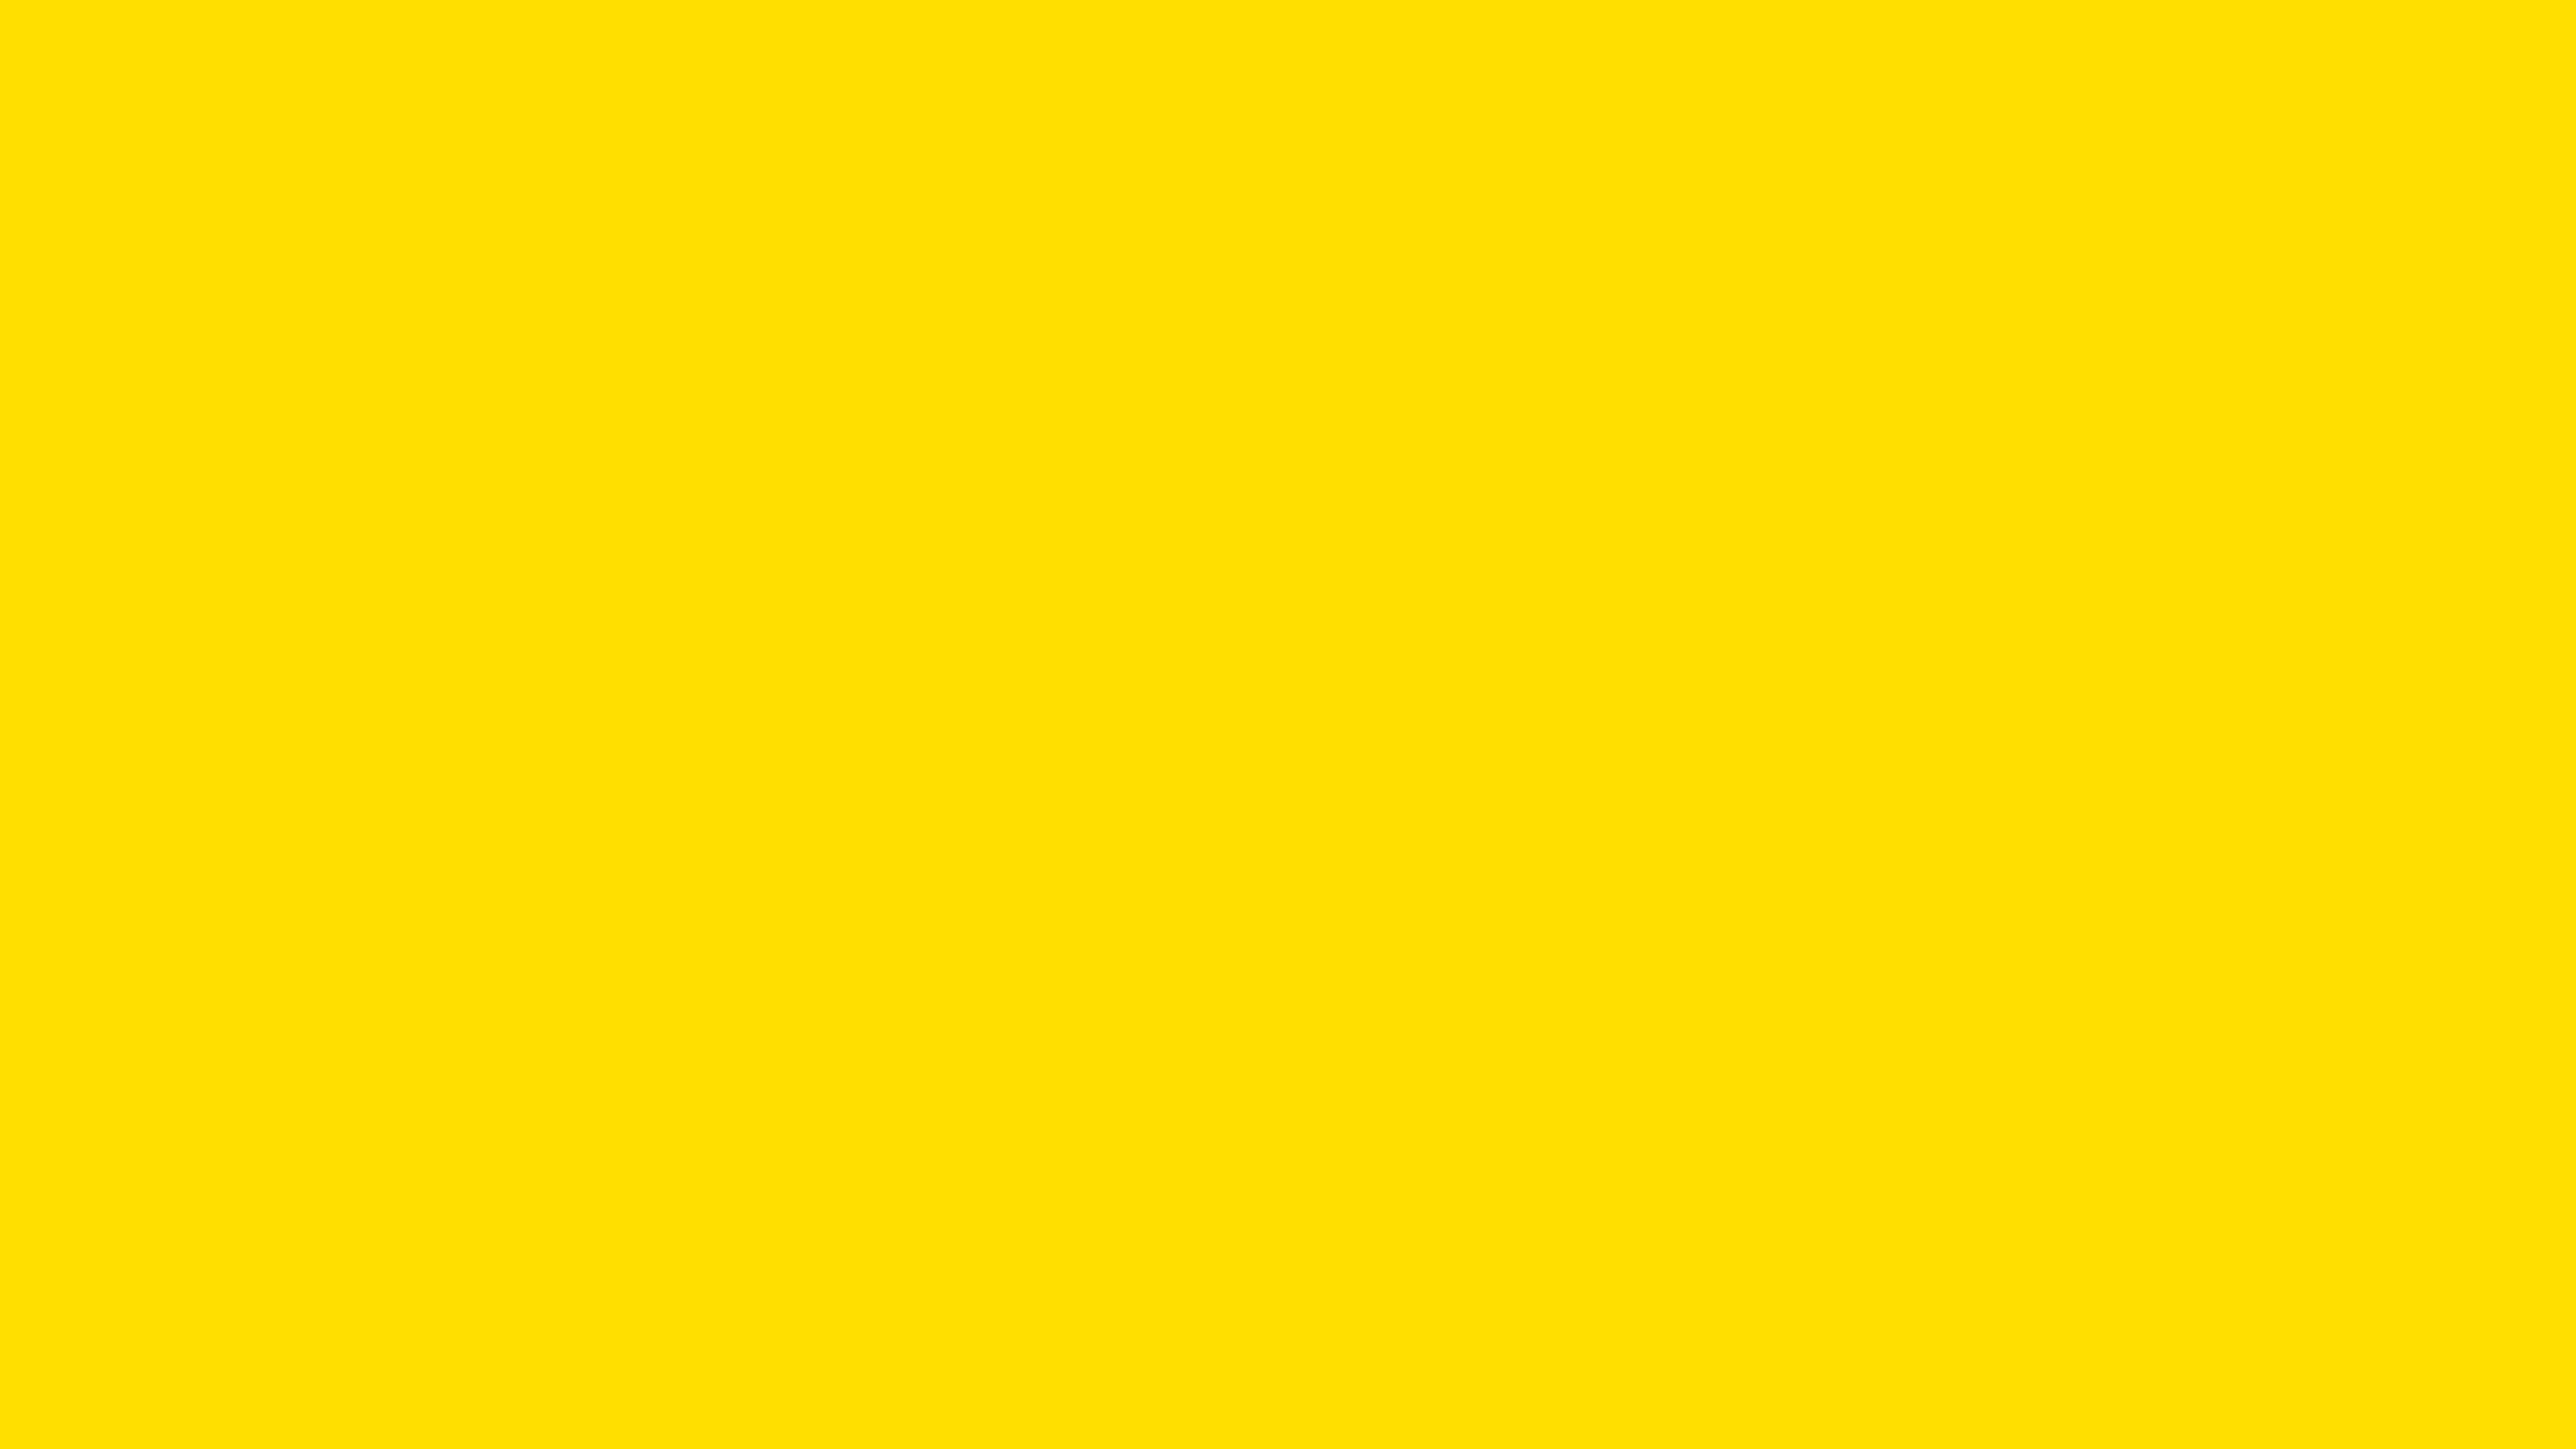 7680x4320 Golden Yellow Solid Color Background